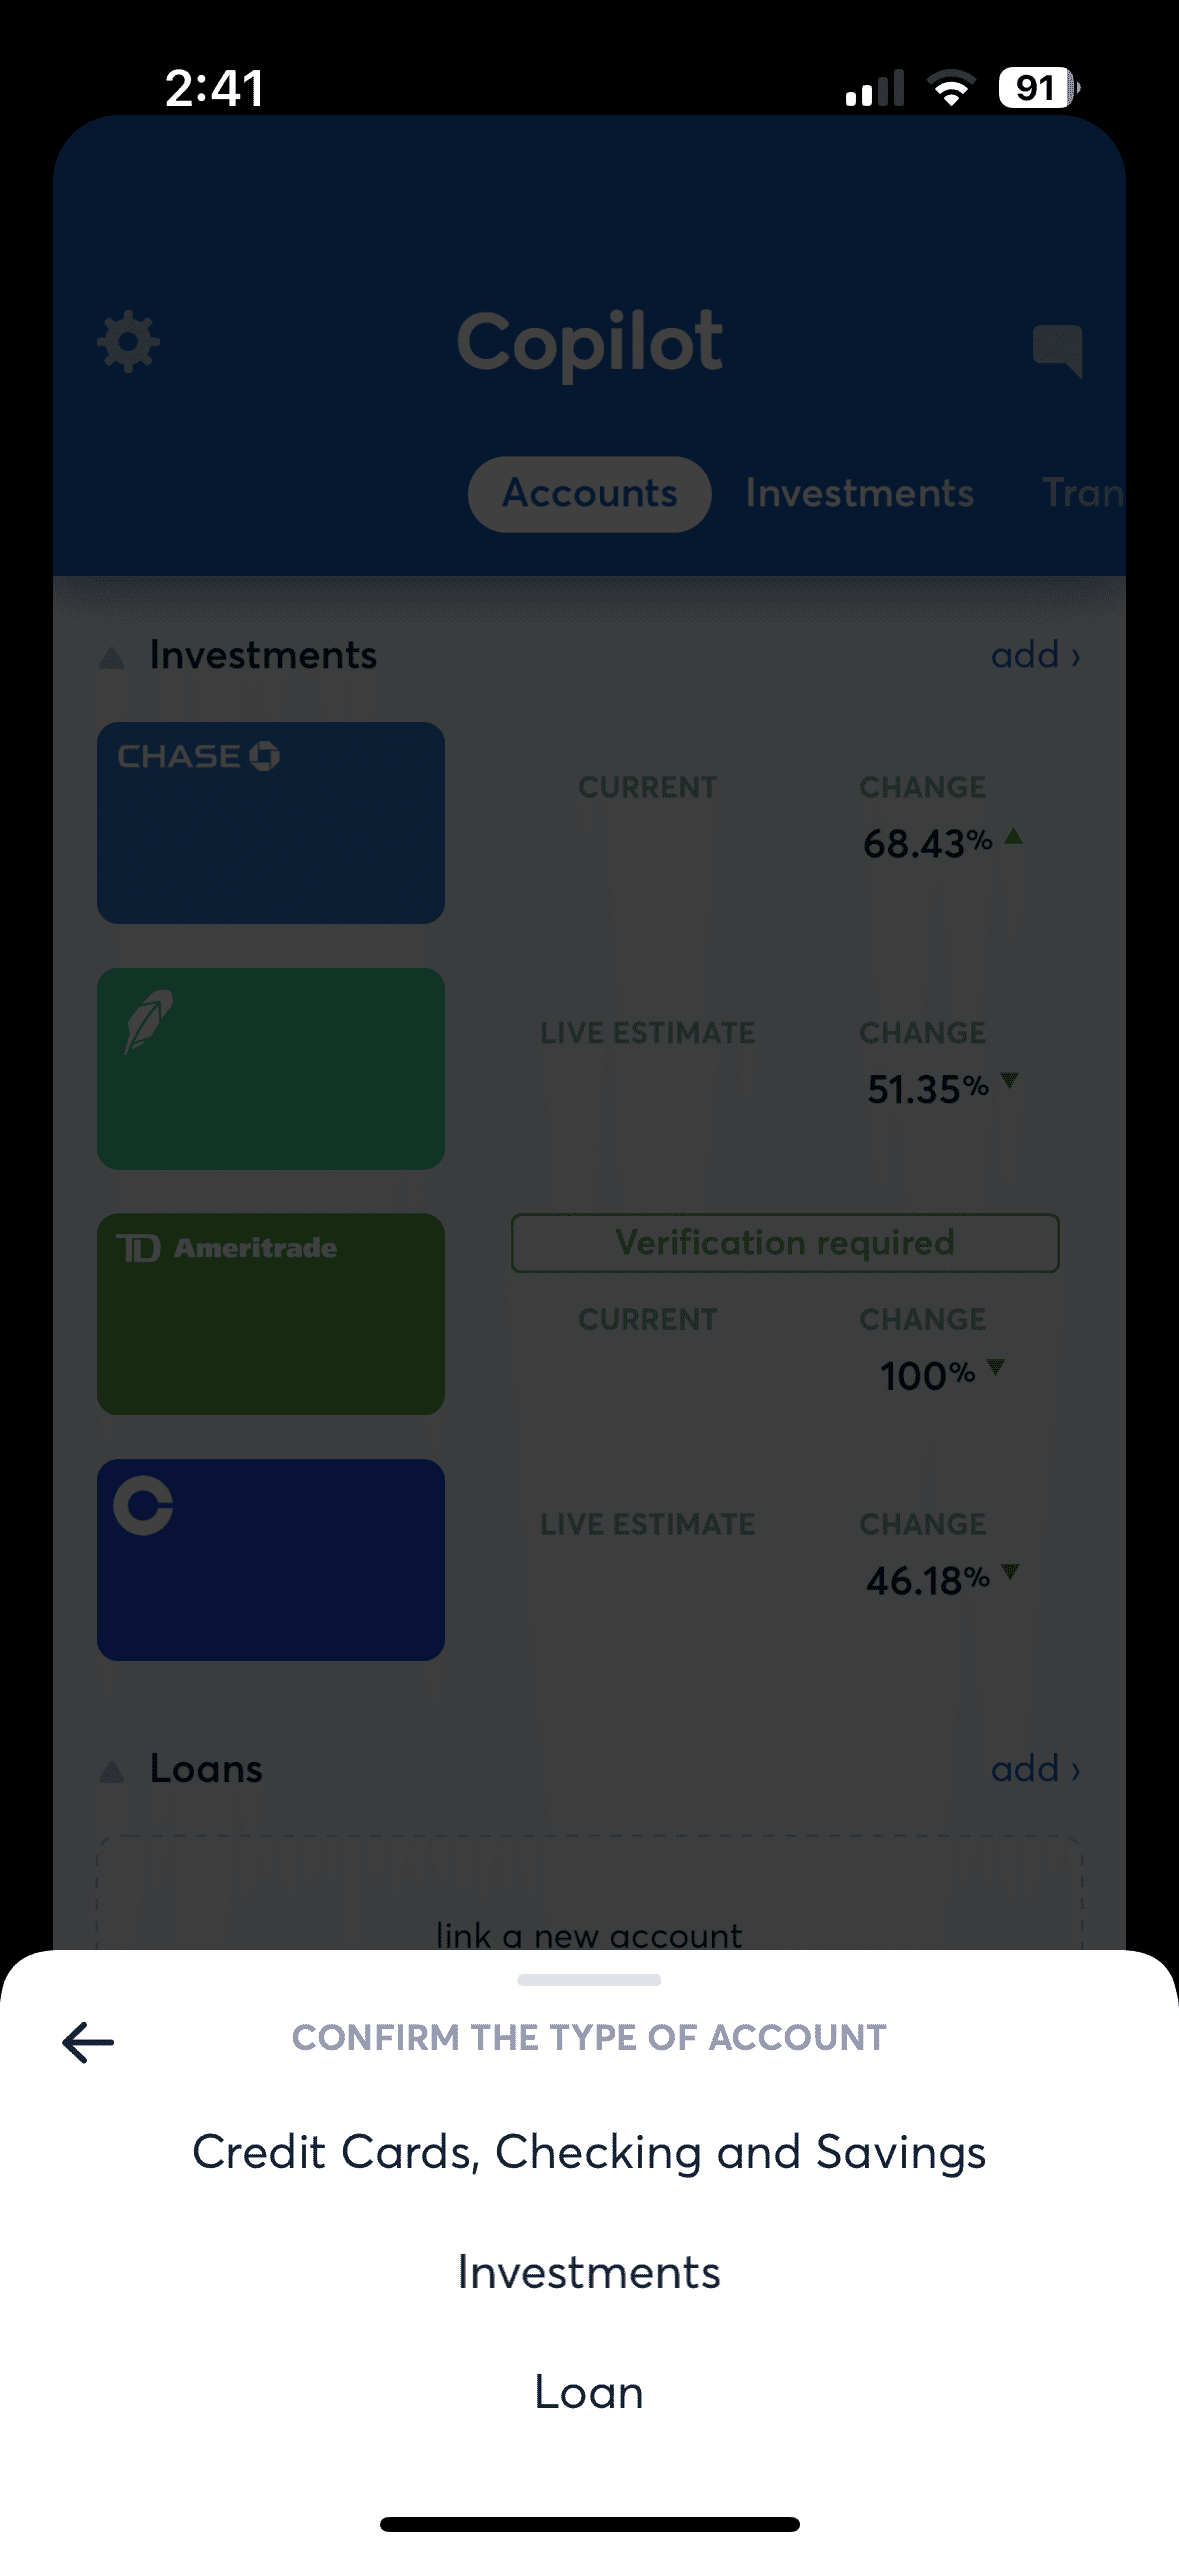 adding new account to copilot app, checking, investment, loan, etc